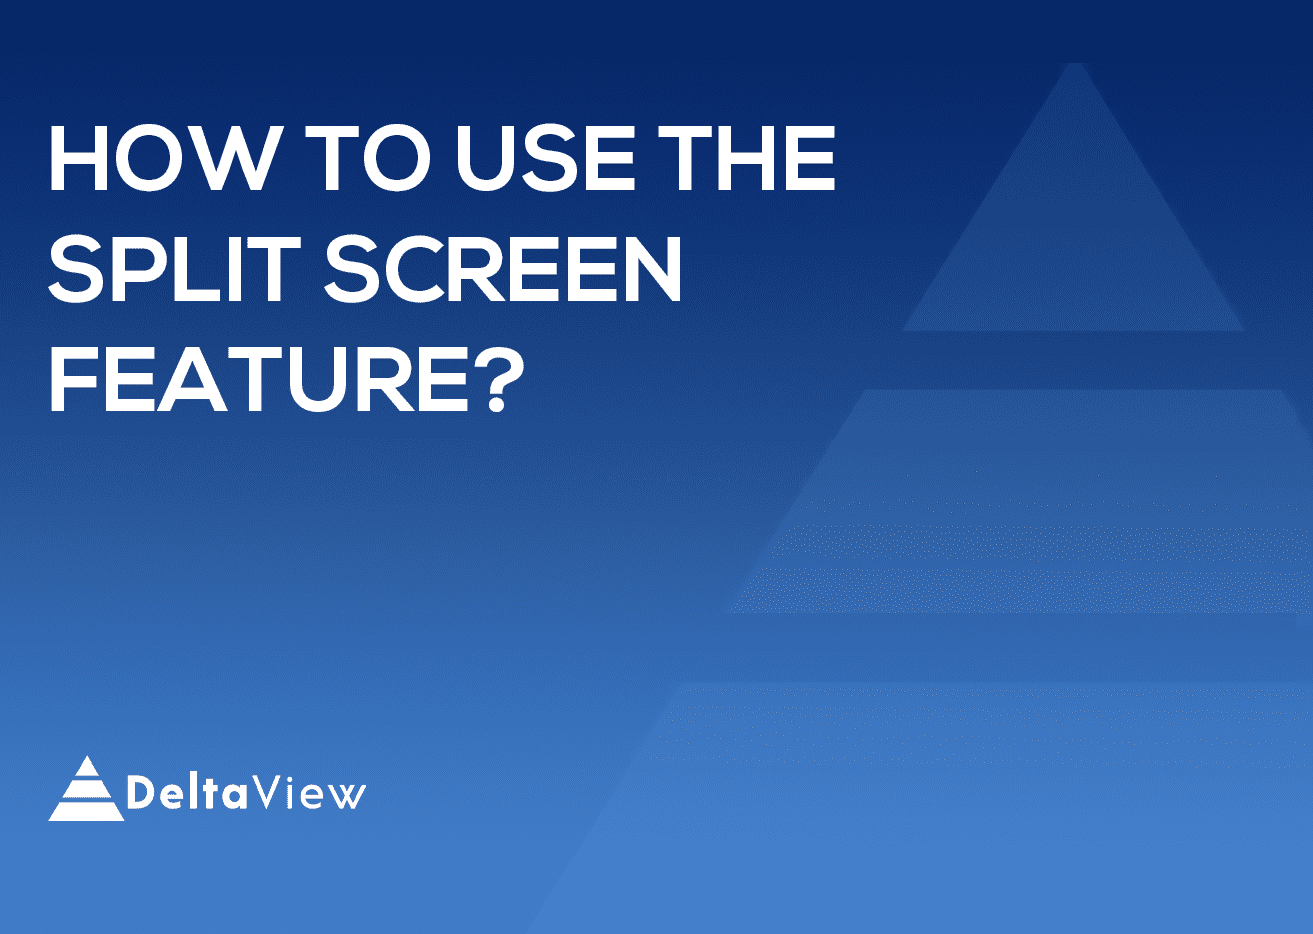 What are the steps to use the Split Screen feature?